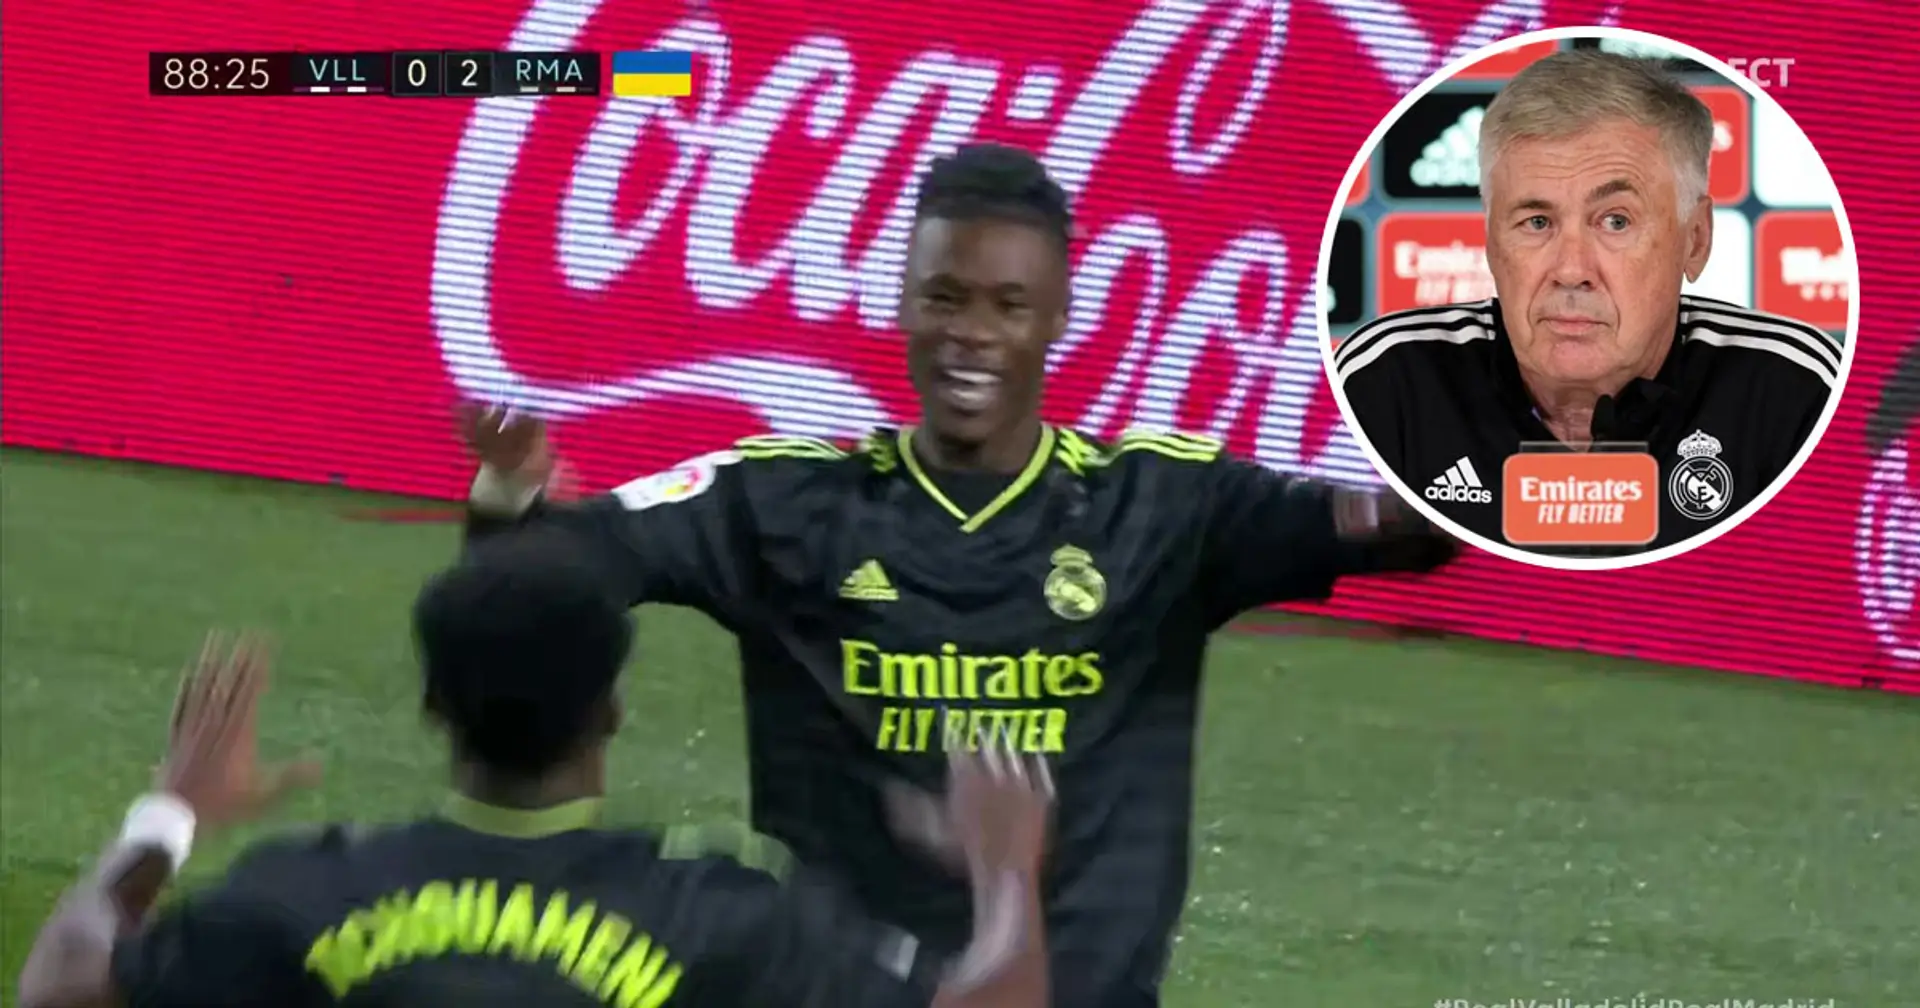 Ancelotti praises Camavinga after youngster's impactful performance off the bench v Valladolid